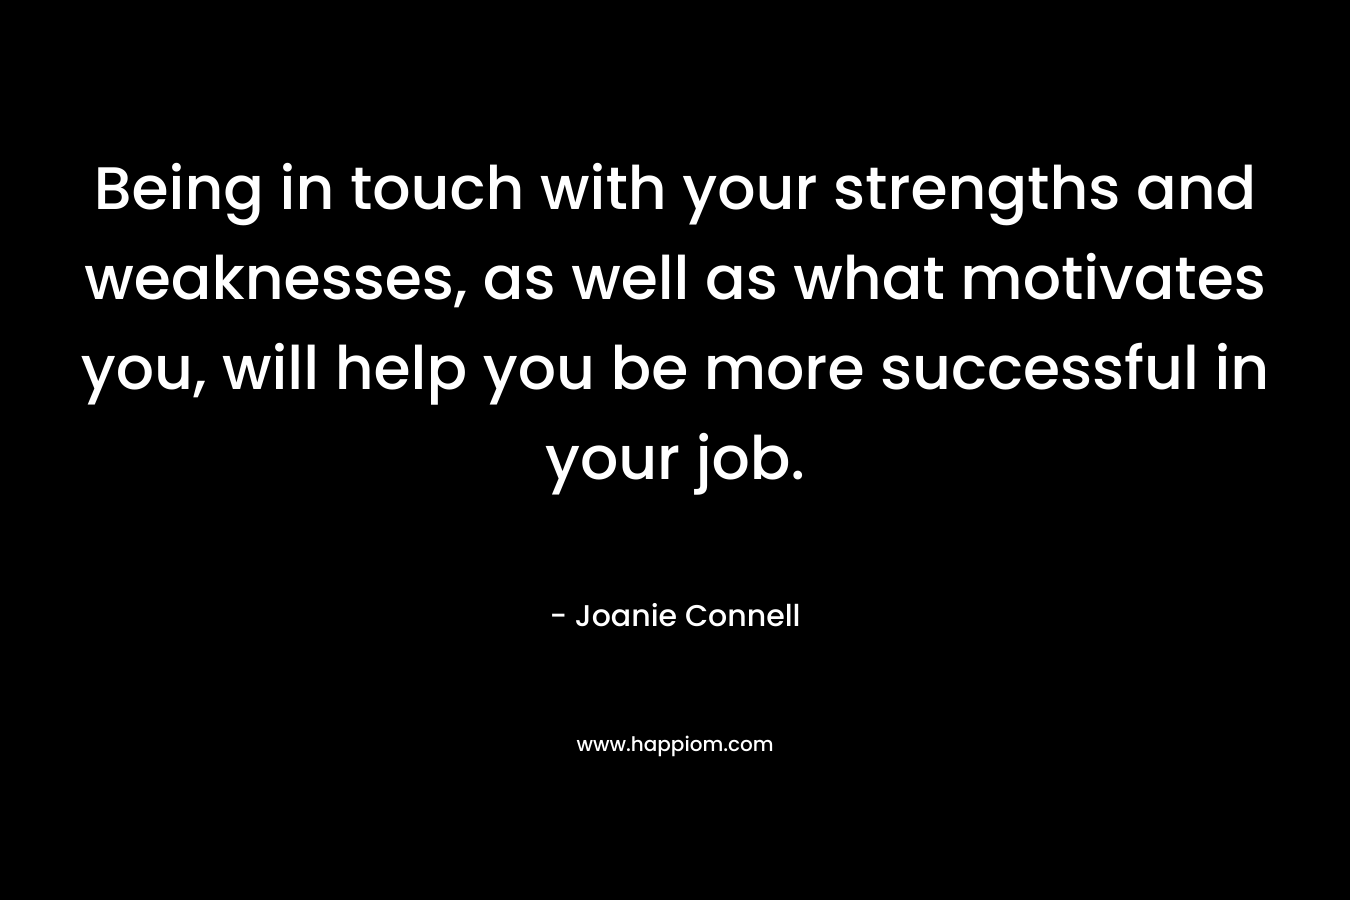 Being in touch with your strengths and weaknesses, as well as what motivates you, will help you be more successful in your job. – Joanie Connell